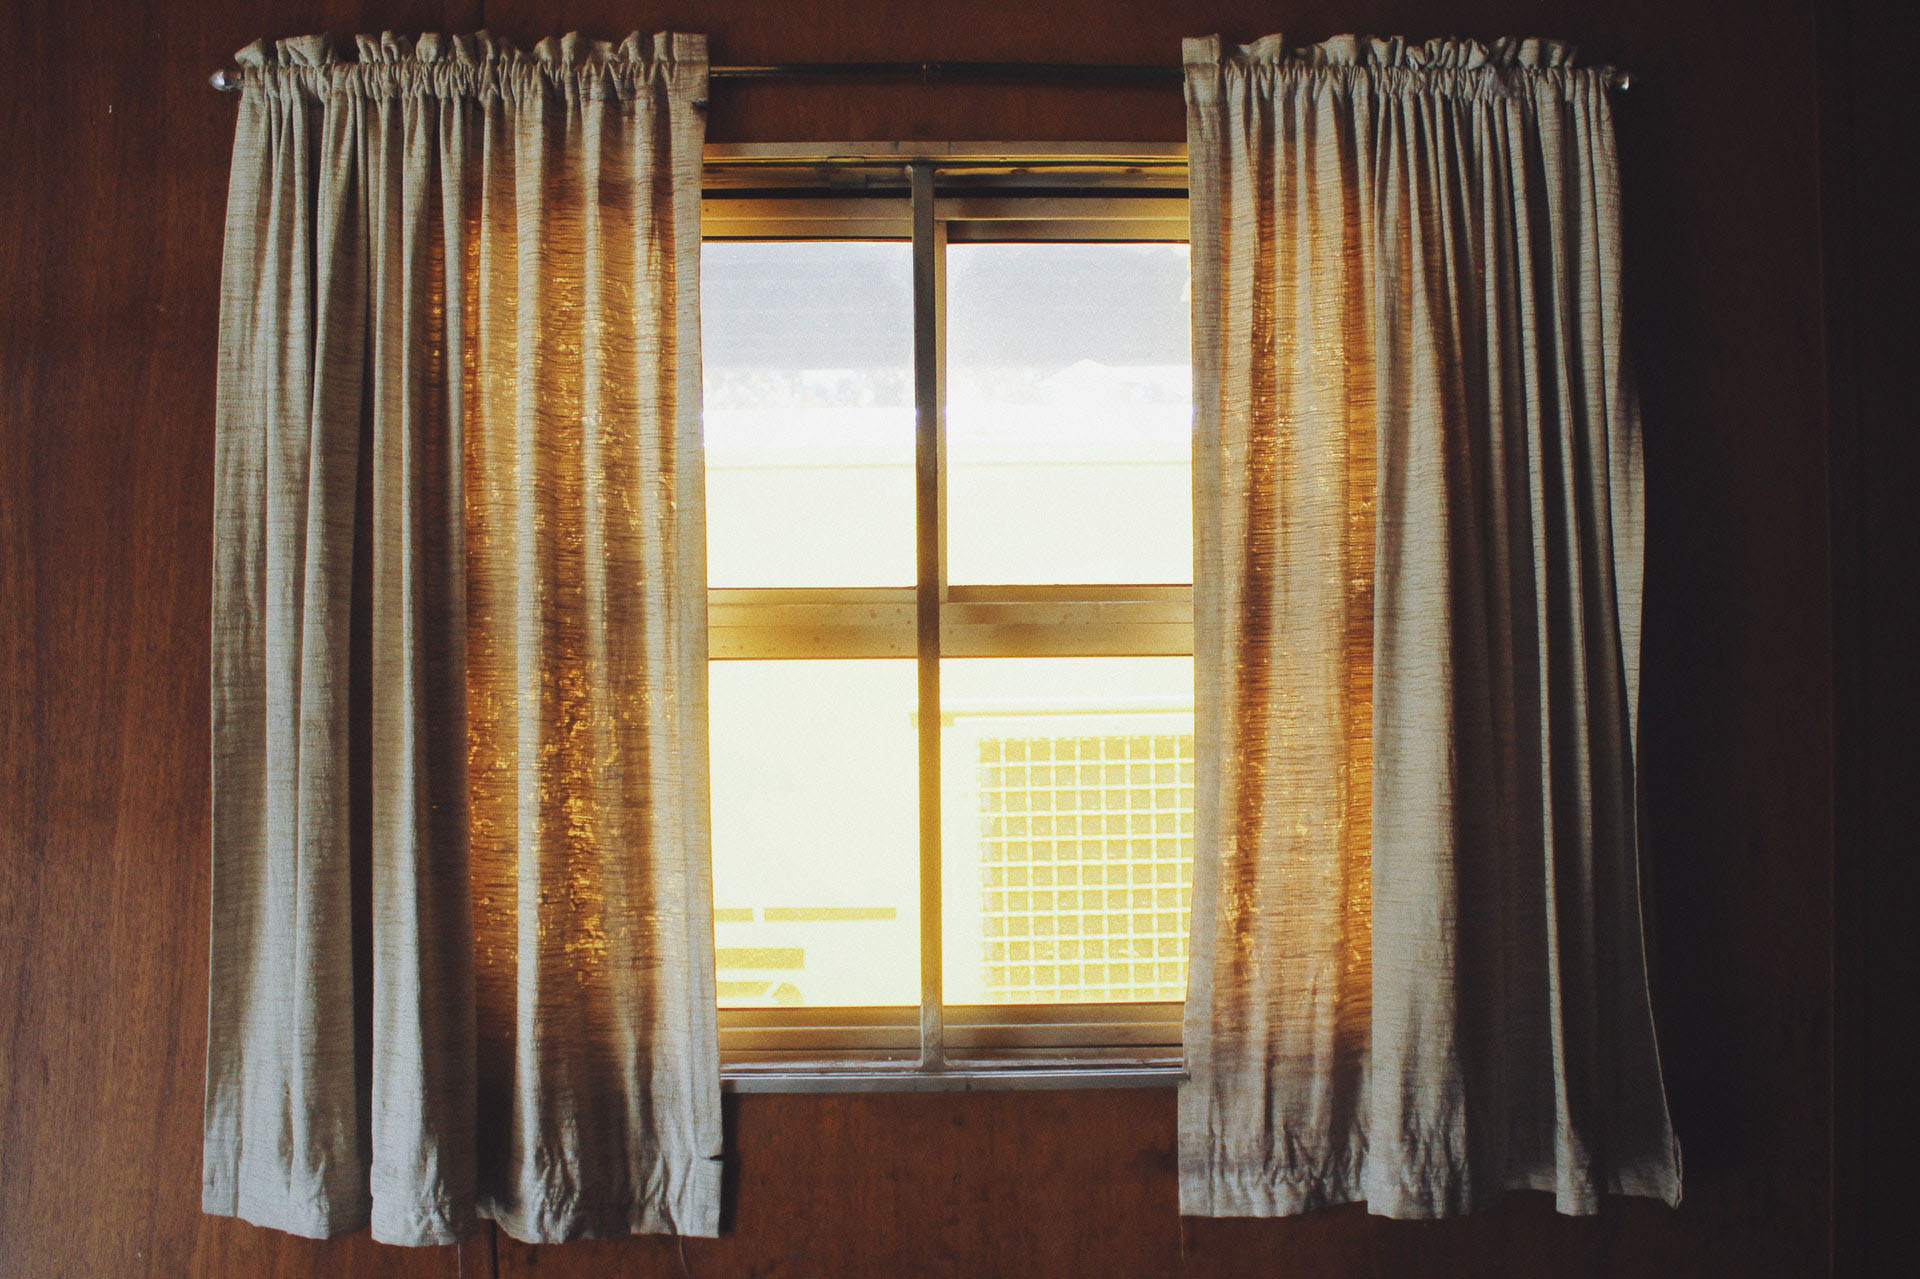 A window with white curtains with warm sunlight coming through